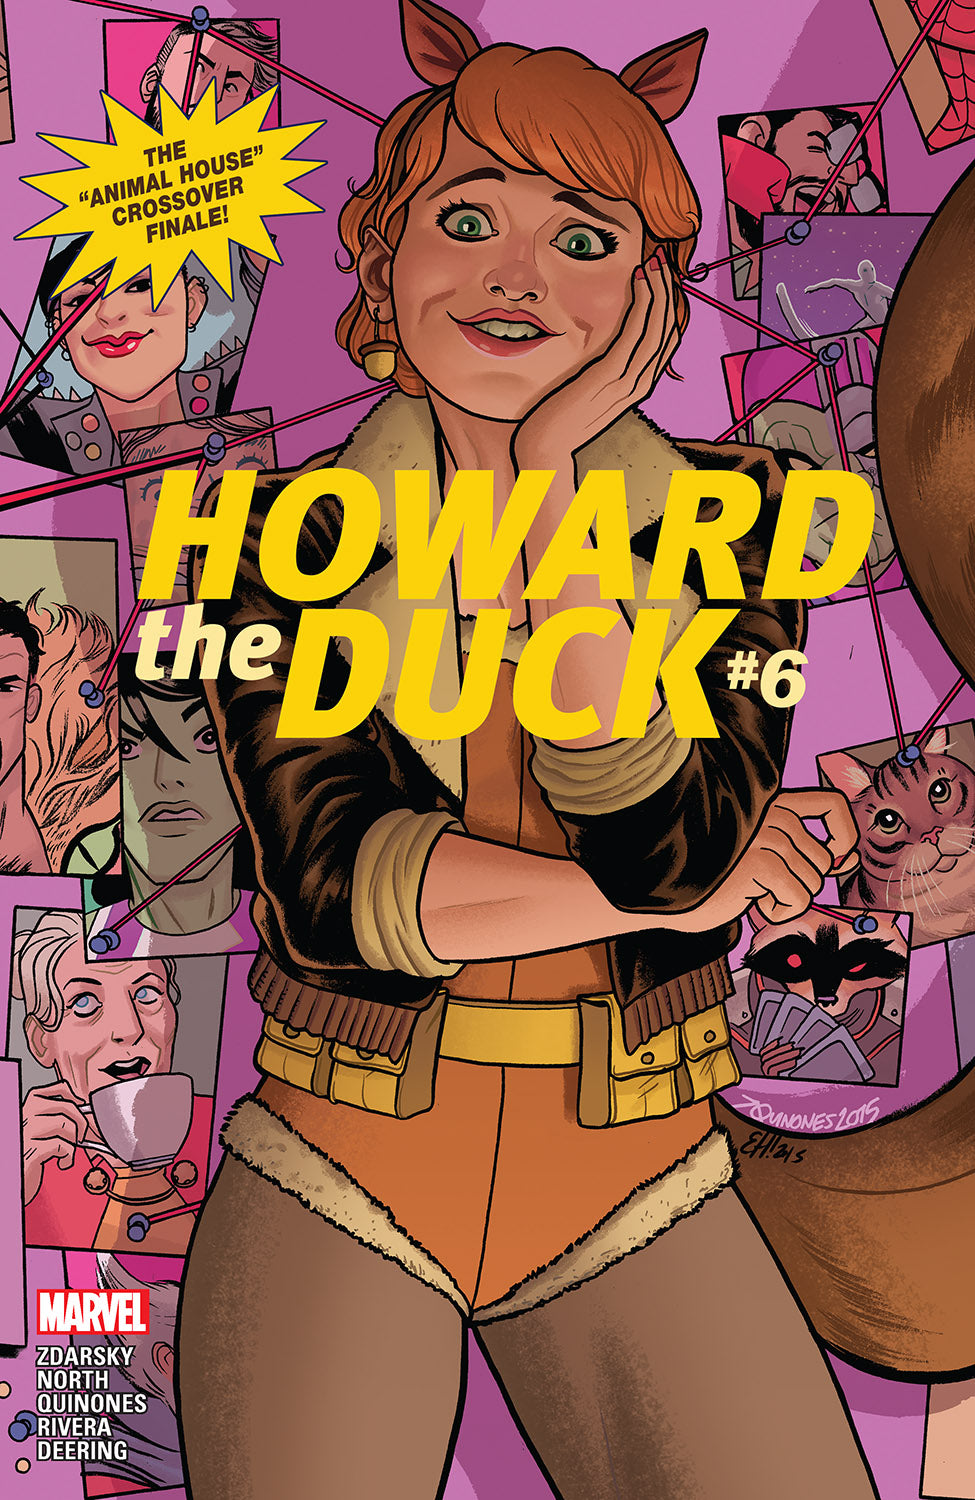 Howard the Duck Issue #6 Volume 6(2016)